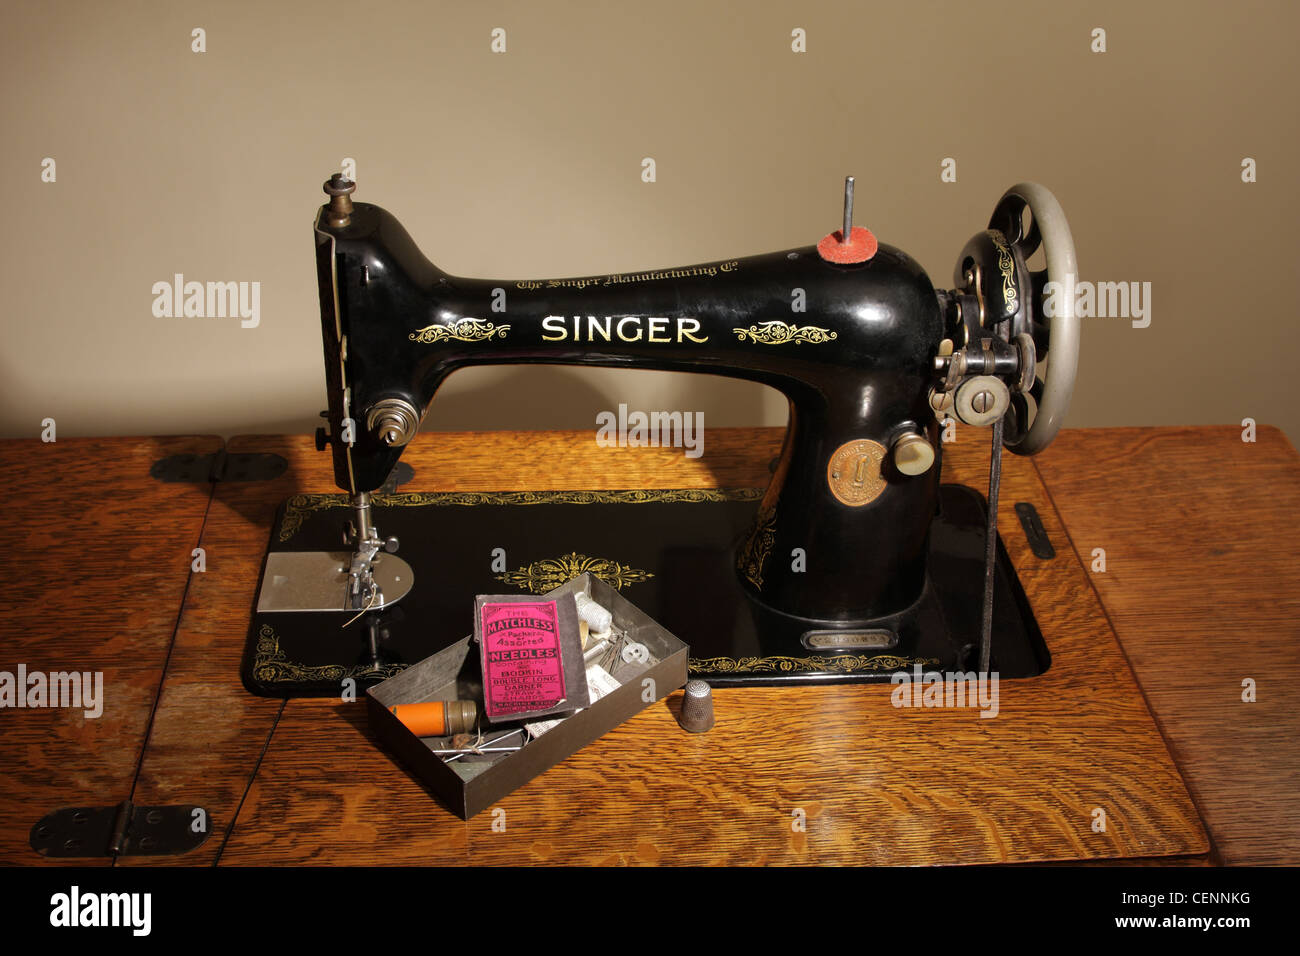 Singer Treadle High Resolution Stock Photography and Images - Alamy